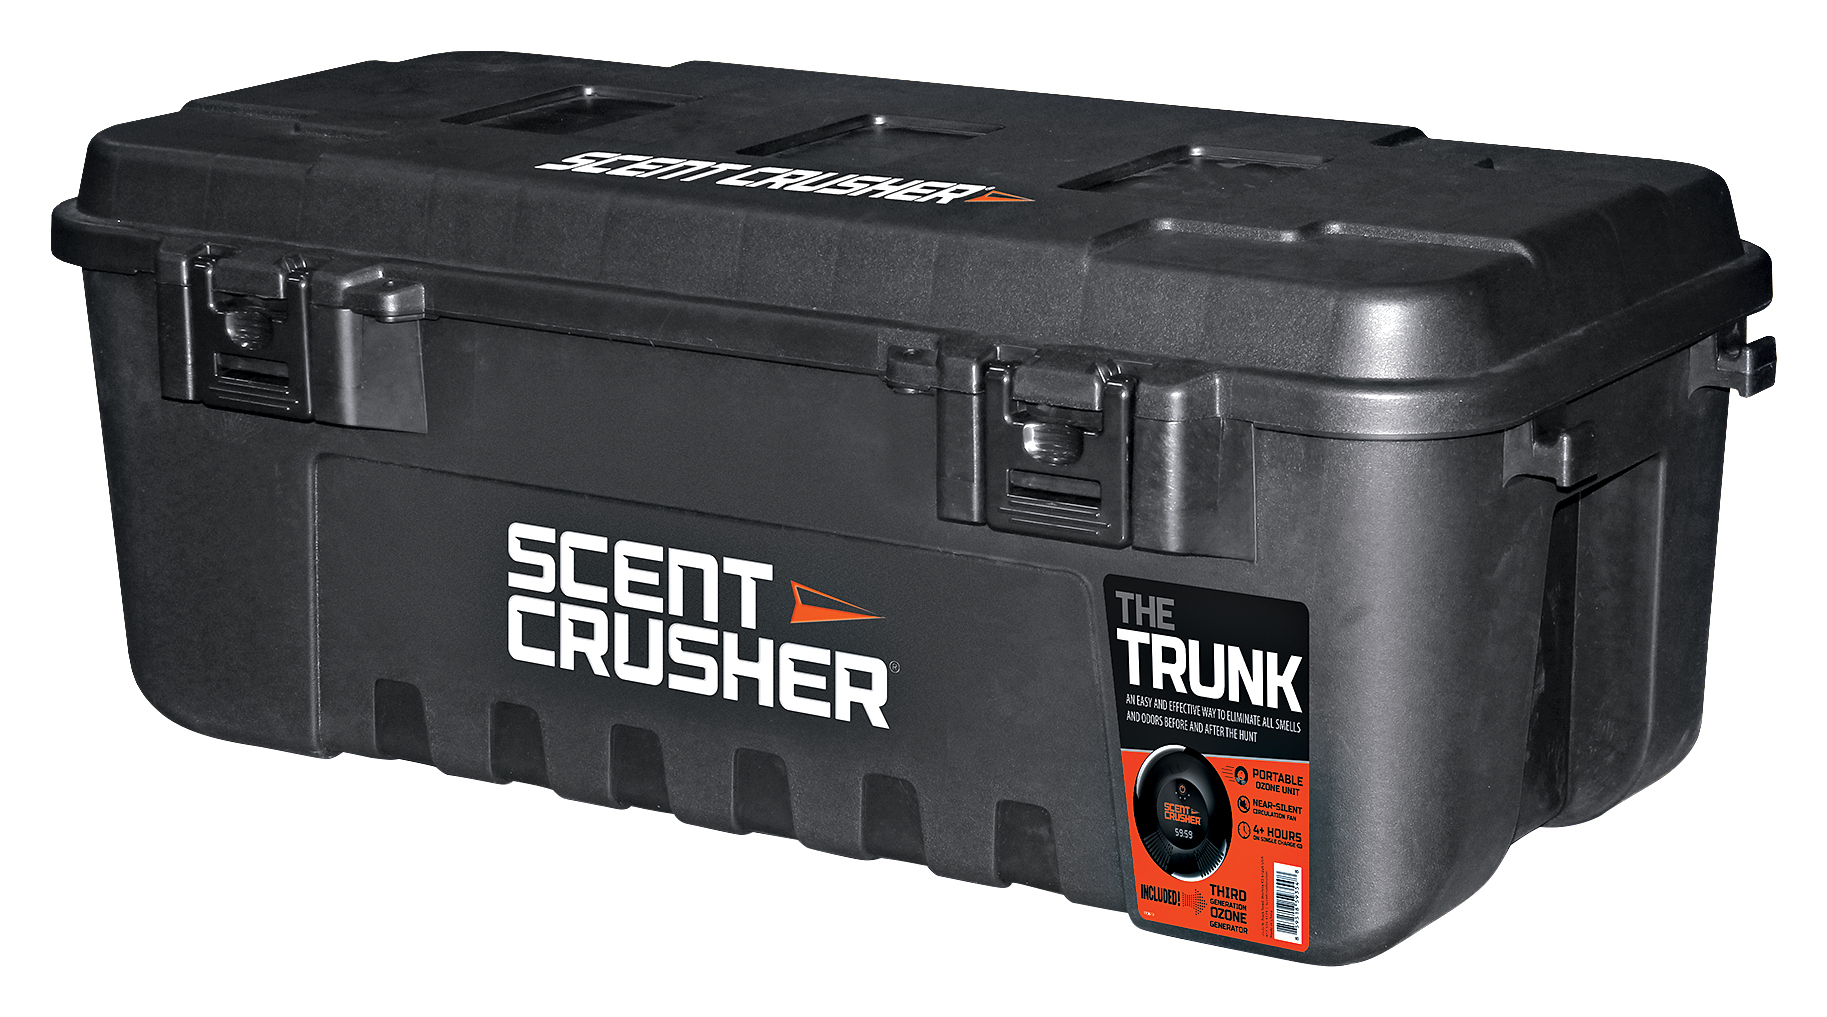 Scent Crusher The Trunk Wheeled Container with Ozone Generator